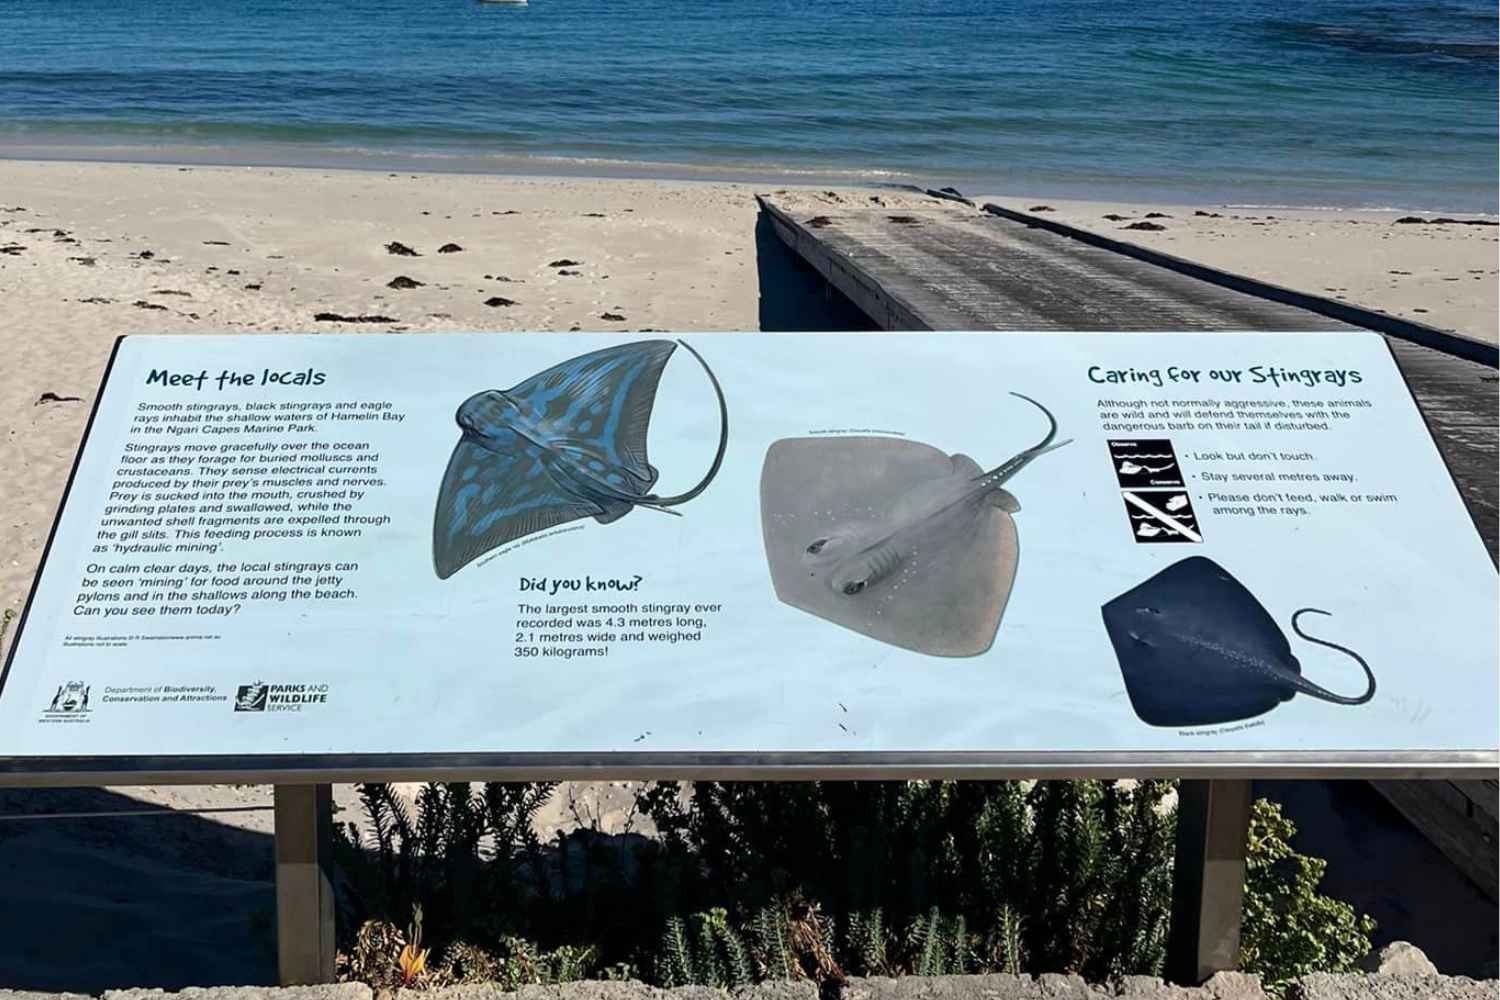 There are many types of stingrays at Hamelin Bay